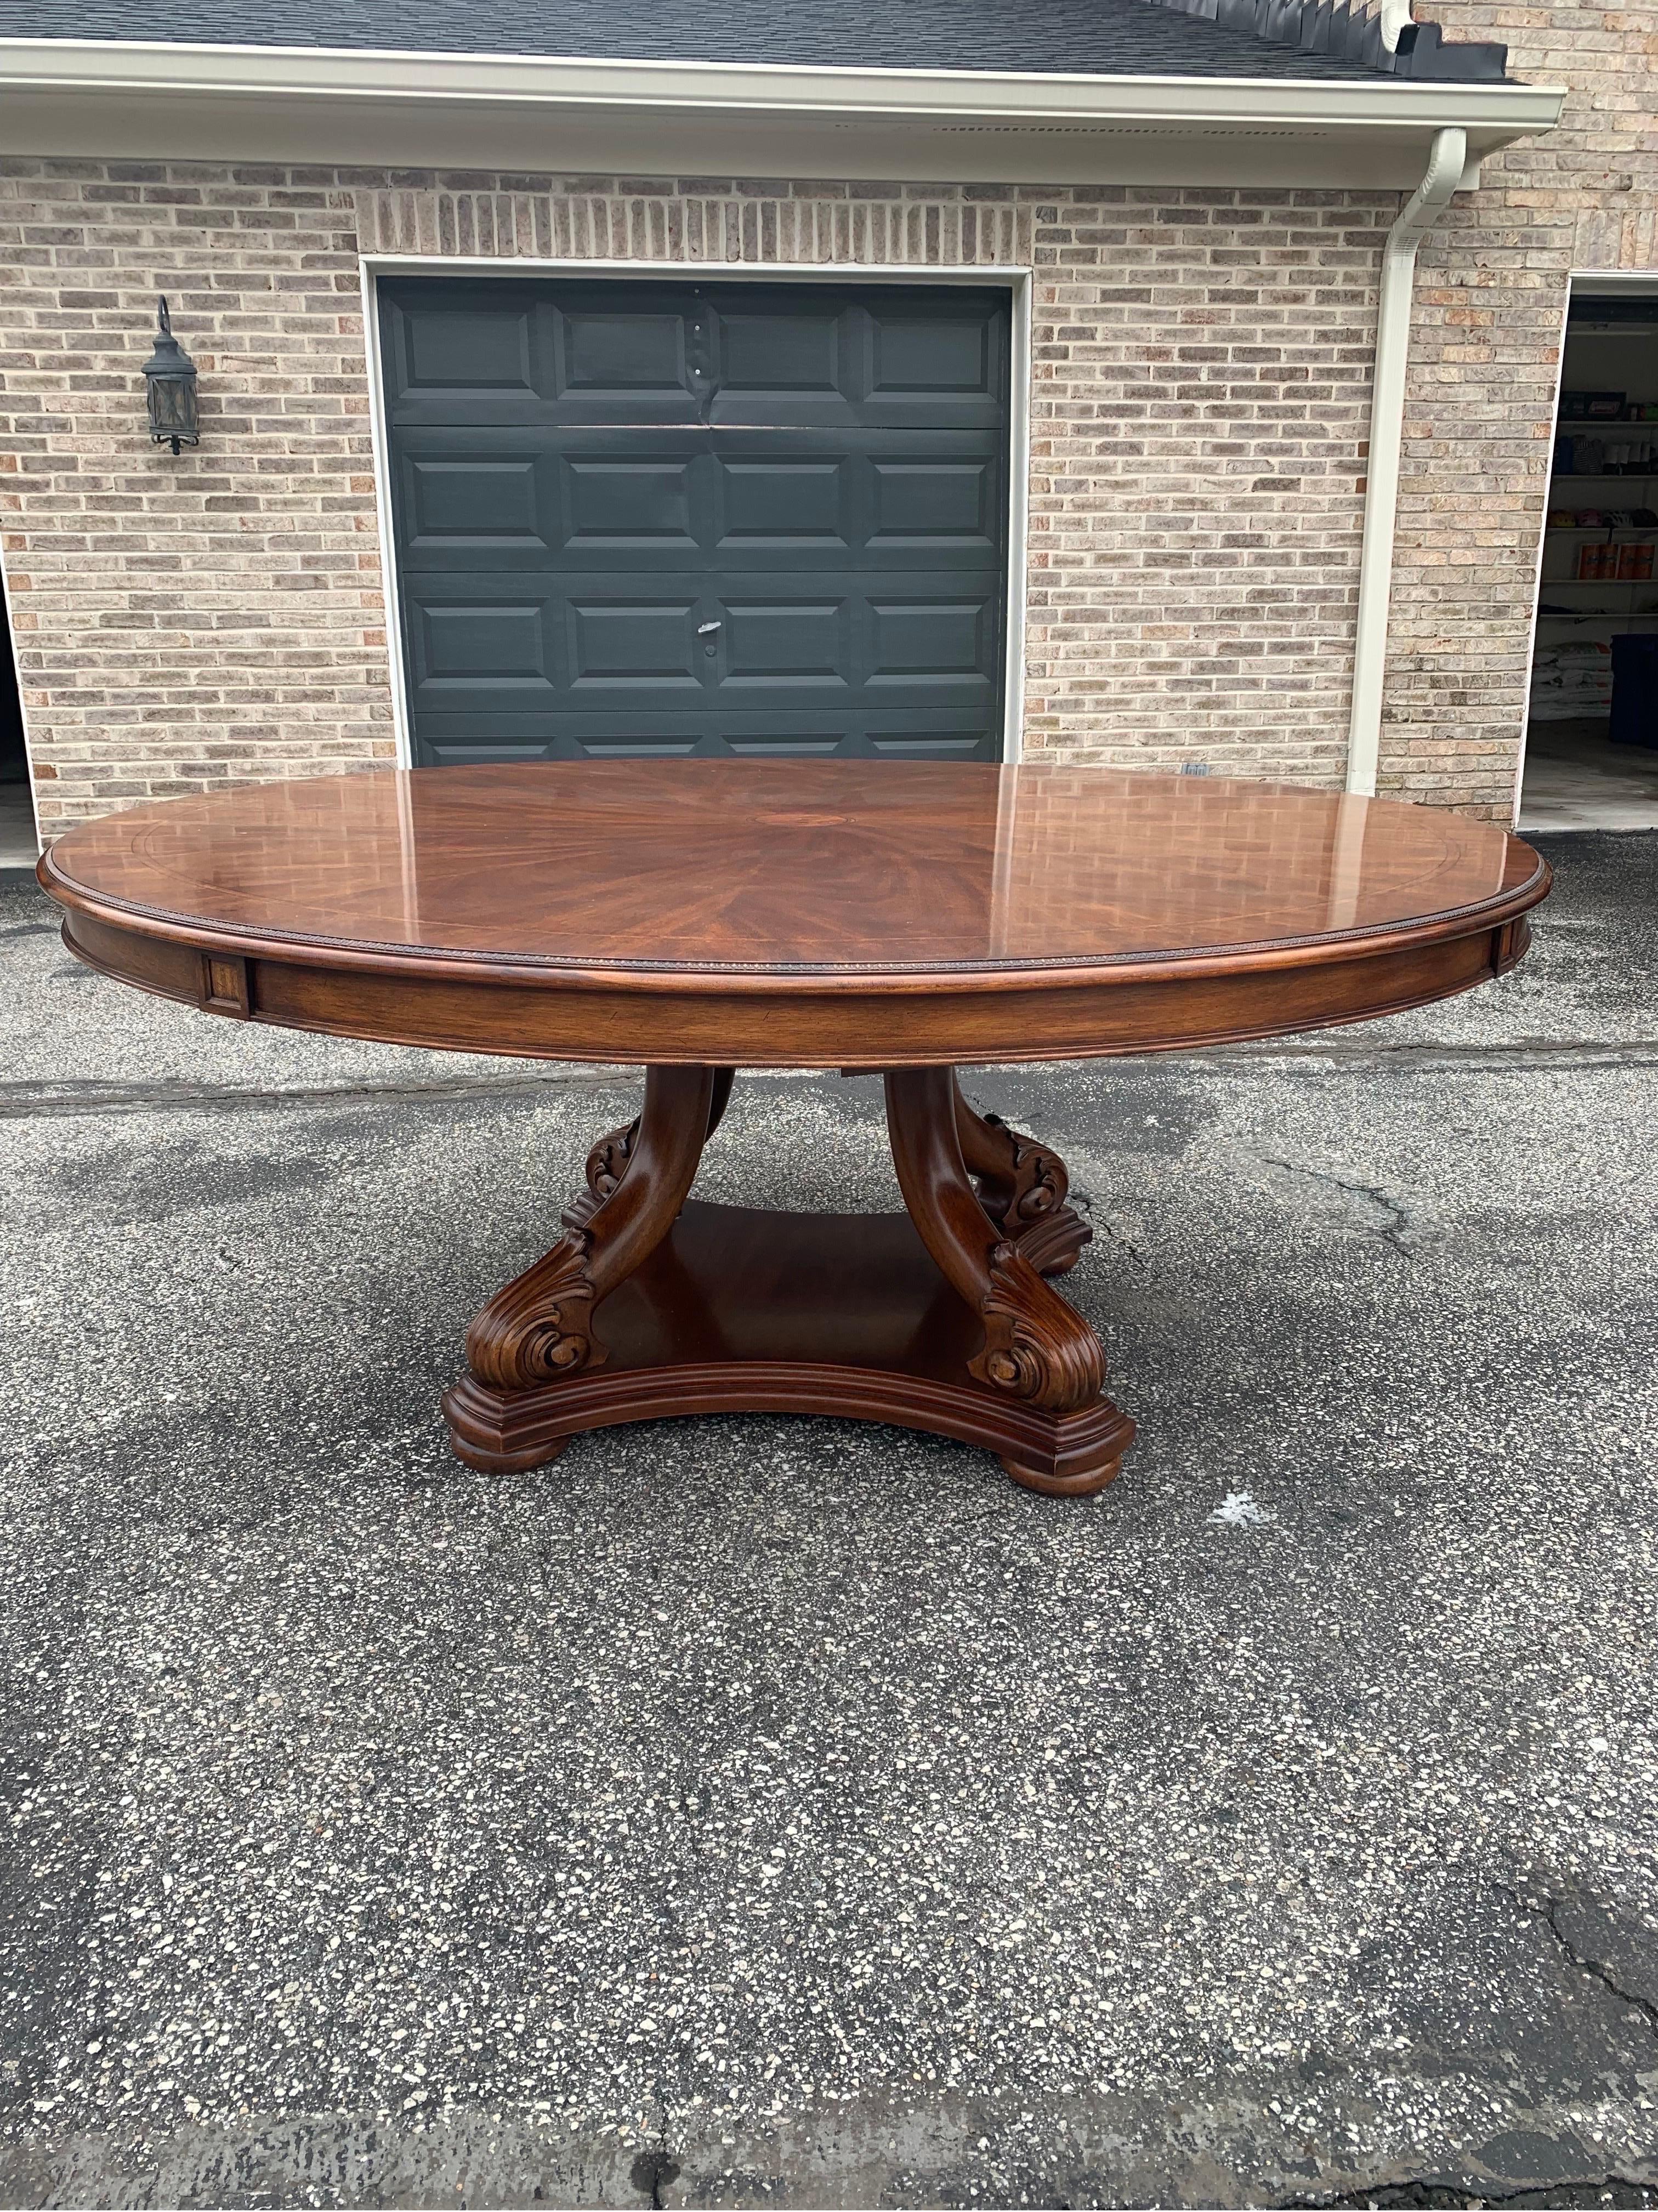 Henkel Harris 74” round inlaid dining table- I was told this table was never used- it is in perfect, mint condition. Table still has price tag of $22,072.34. 


Henkel Harris style 22750

Finish 37- heirloom mahogany.